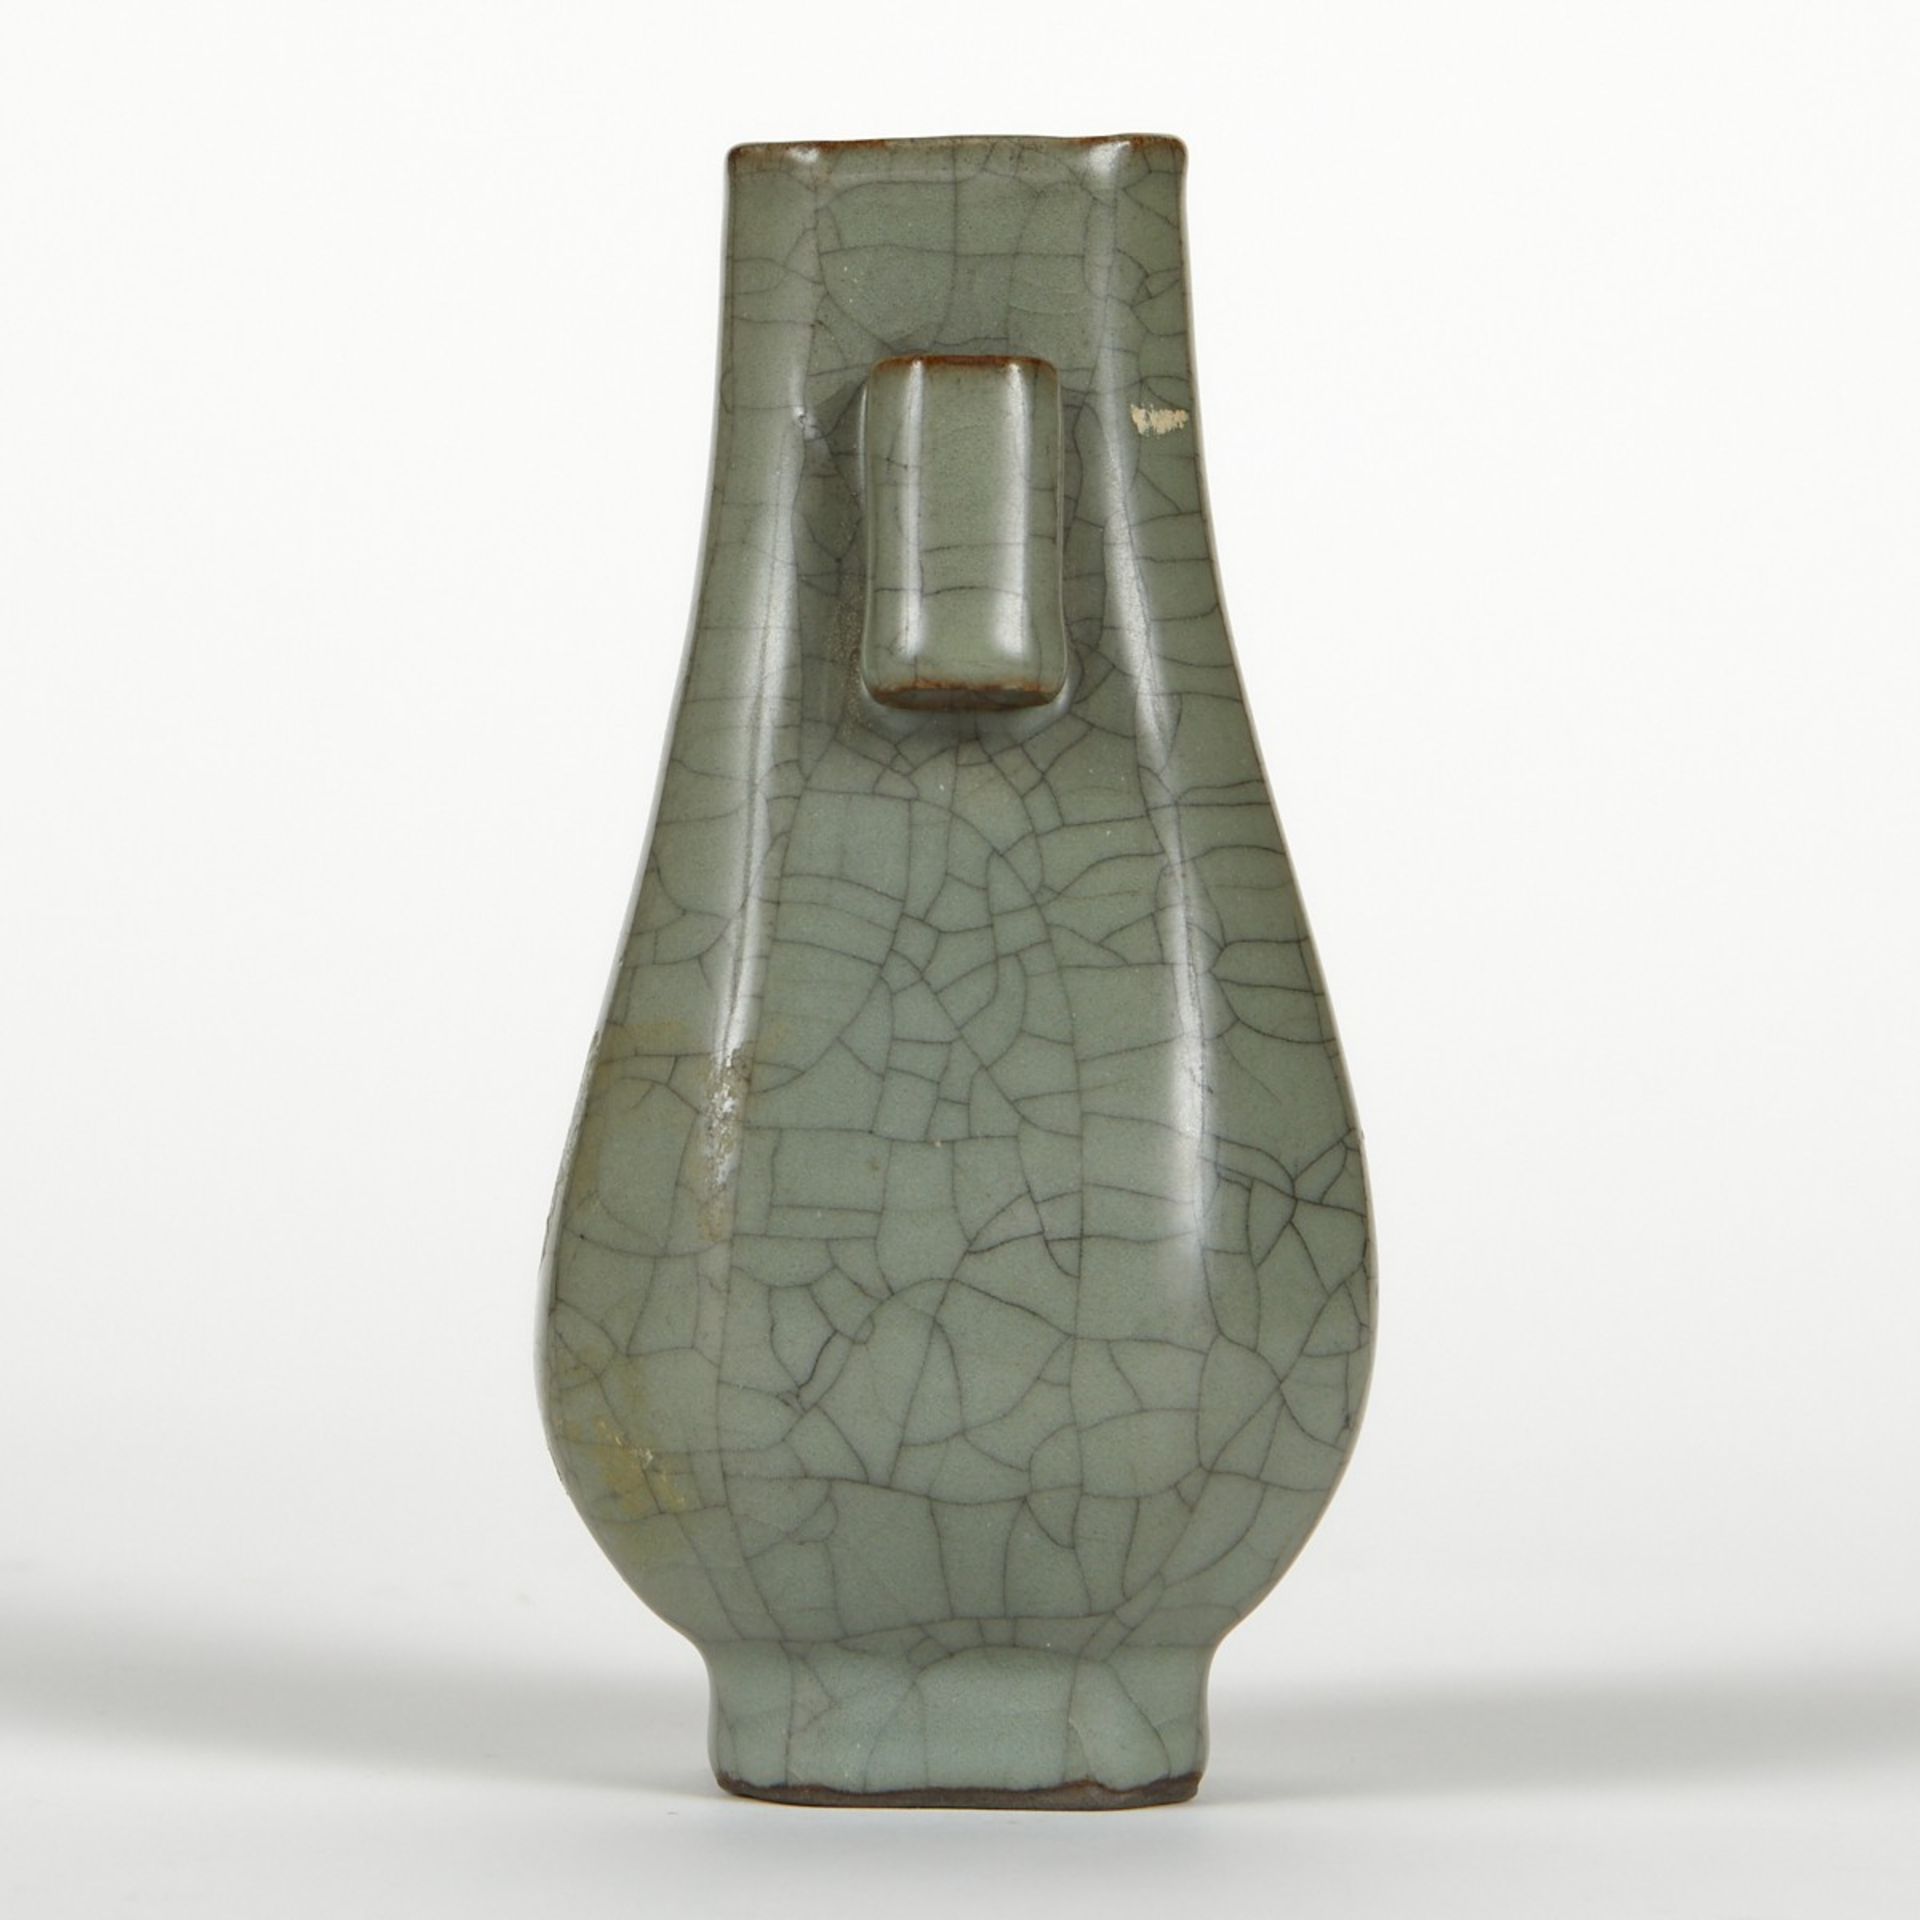 Chinese High Fired Ceramic Crackle Hu Vase - Image 3 of 7